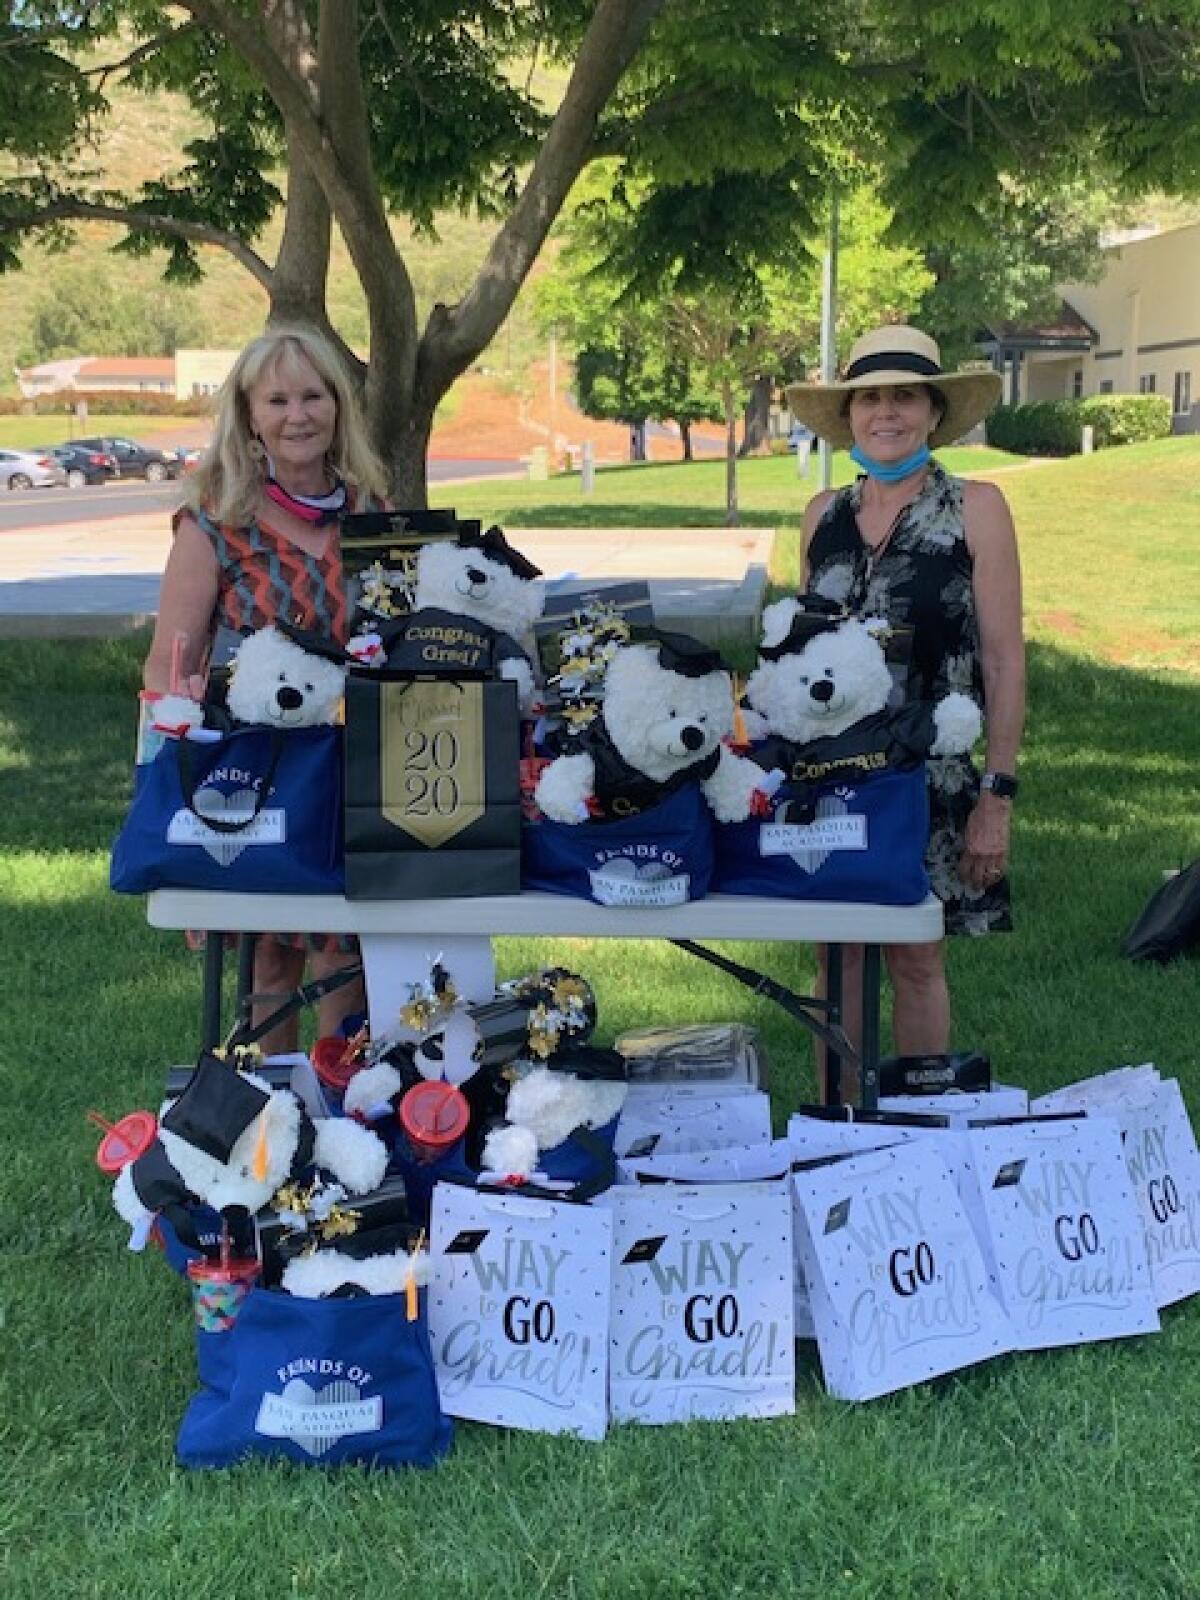 Friends of San Pasqual Academy board members Joan Scott and Kathy Lathrum handed out special graduation gifts for every senior at San Pasqual Academy. Each graduate is offered a scholarship to further their education. Friends of San Pasqual is currently supporting over 80 graduates, who are attending various colleges and vocational schools.